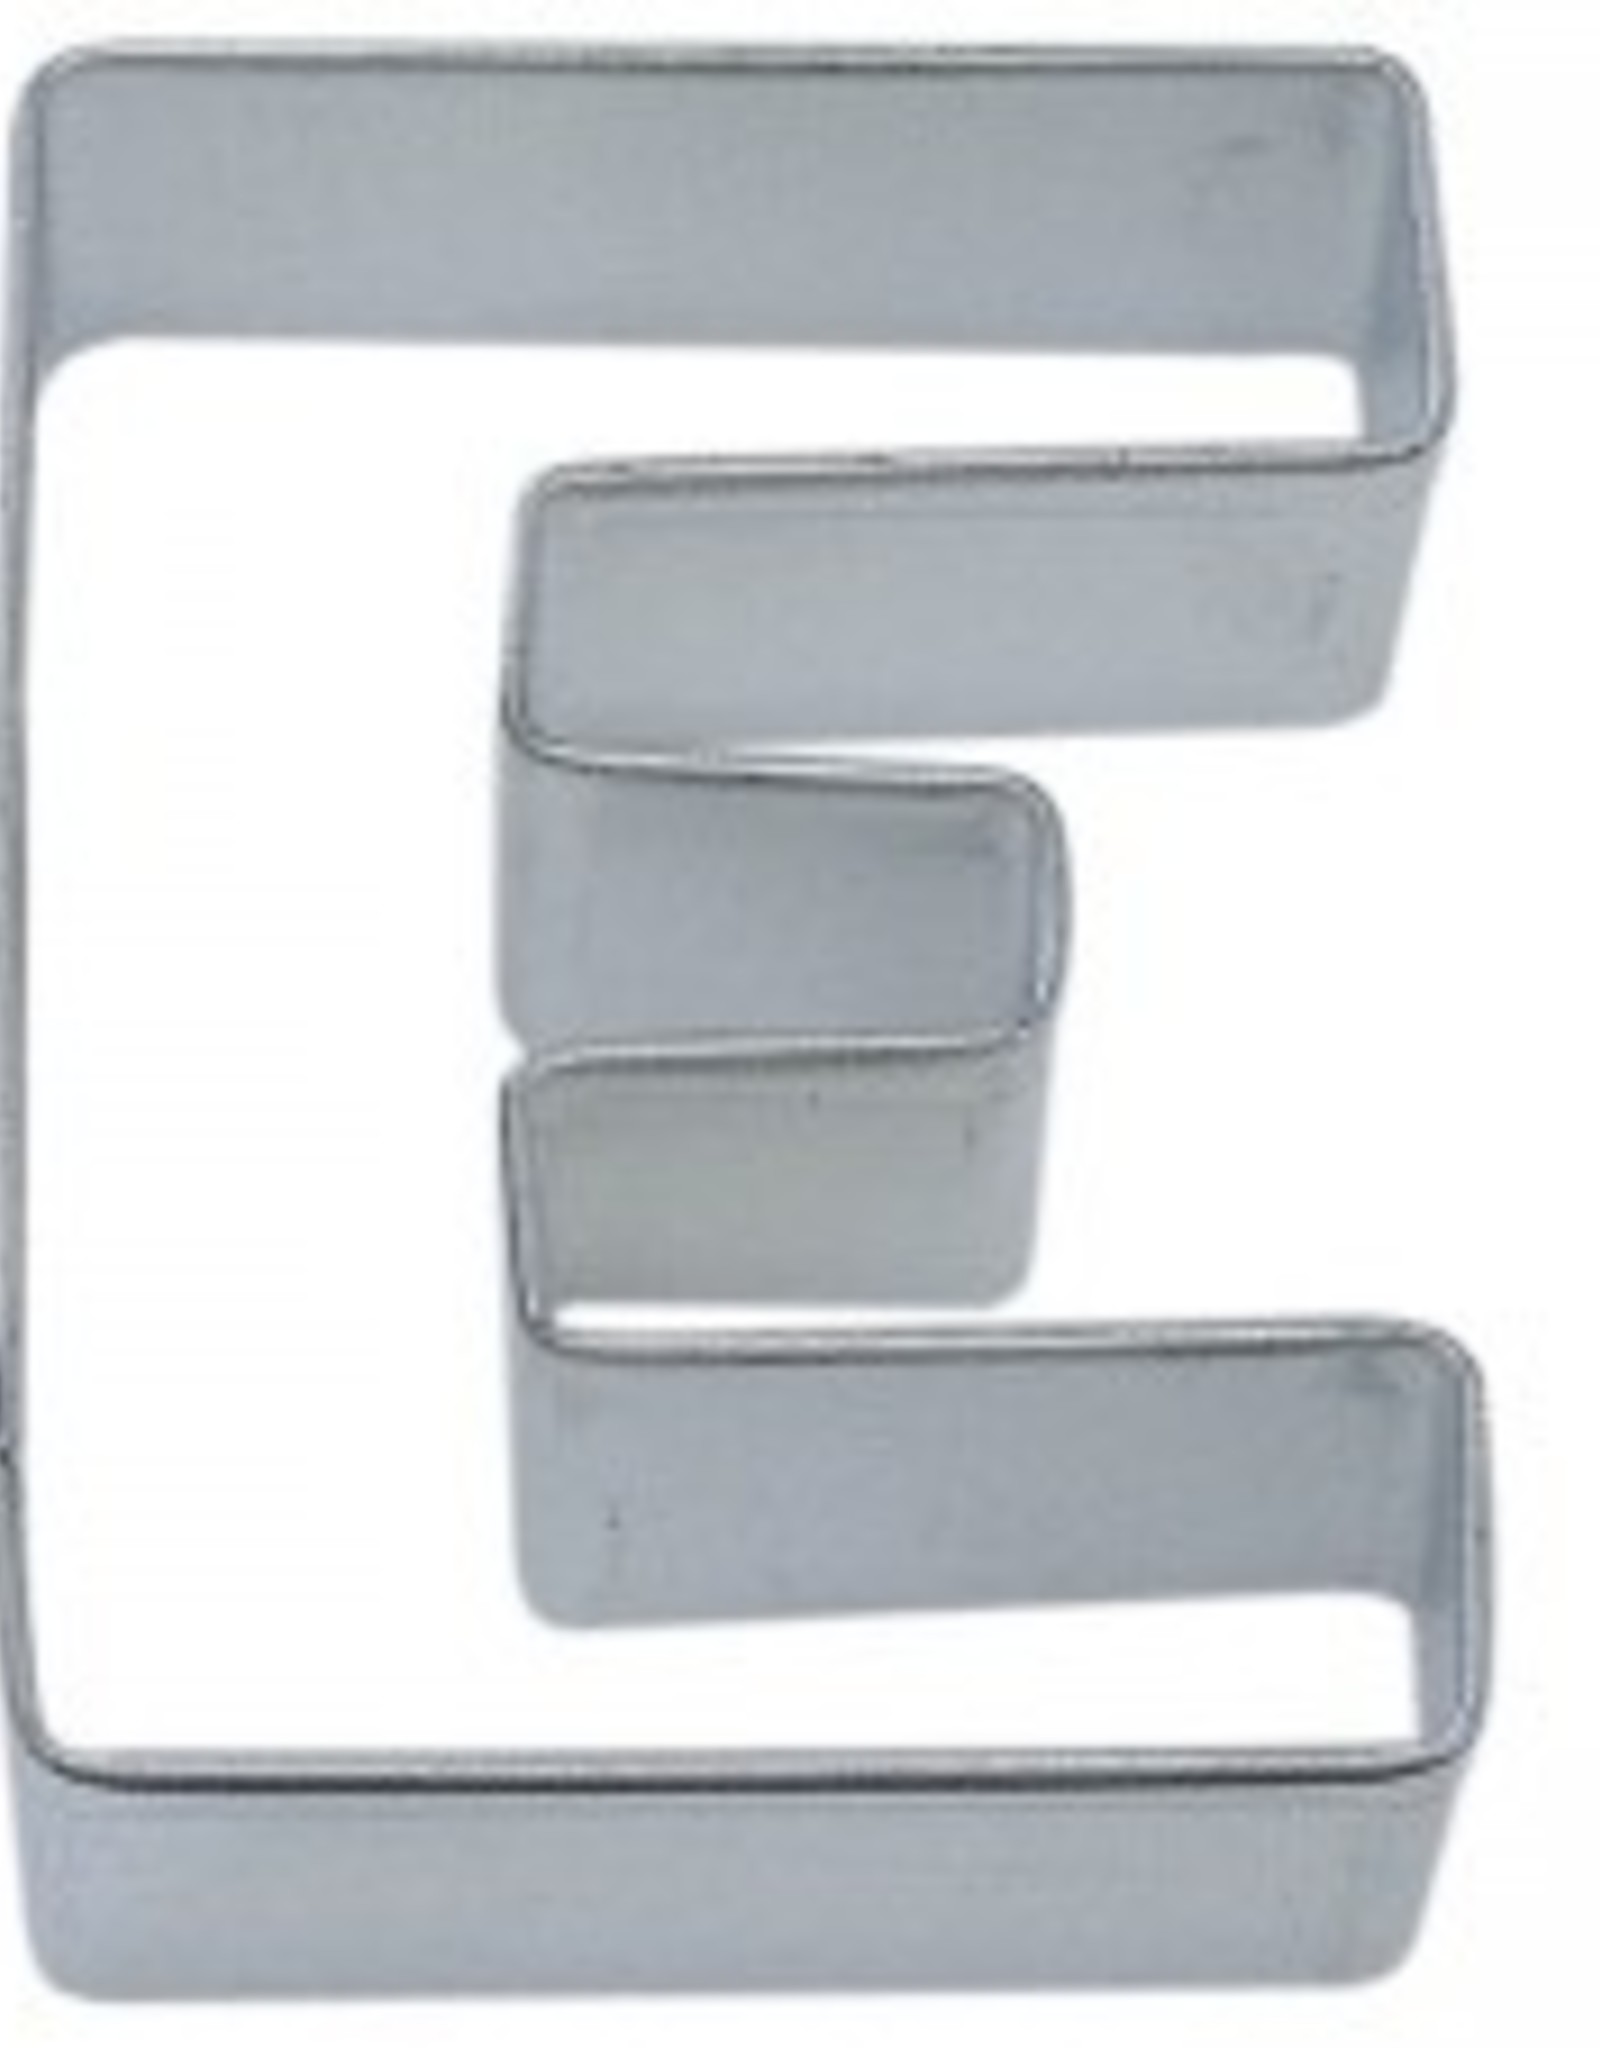 Letter "E" Cookie Cutter(3")